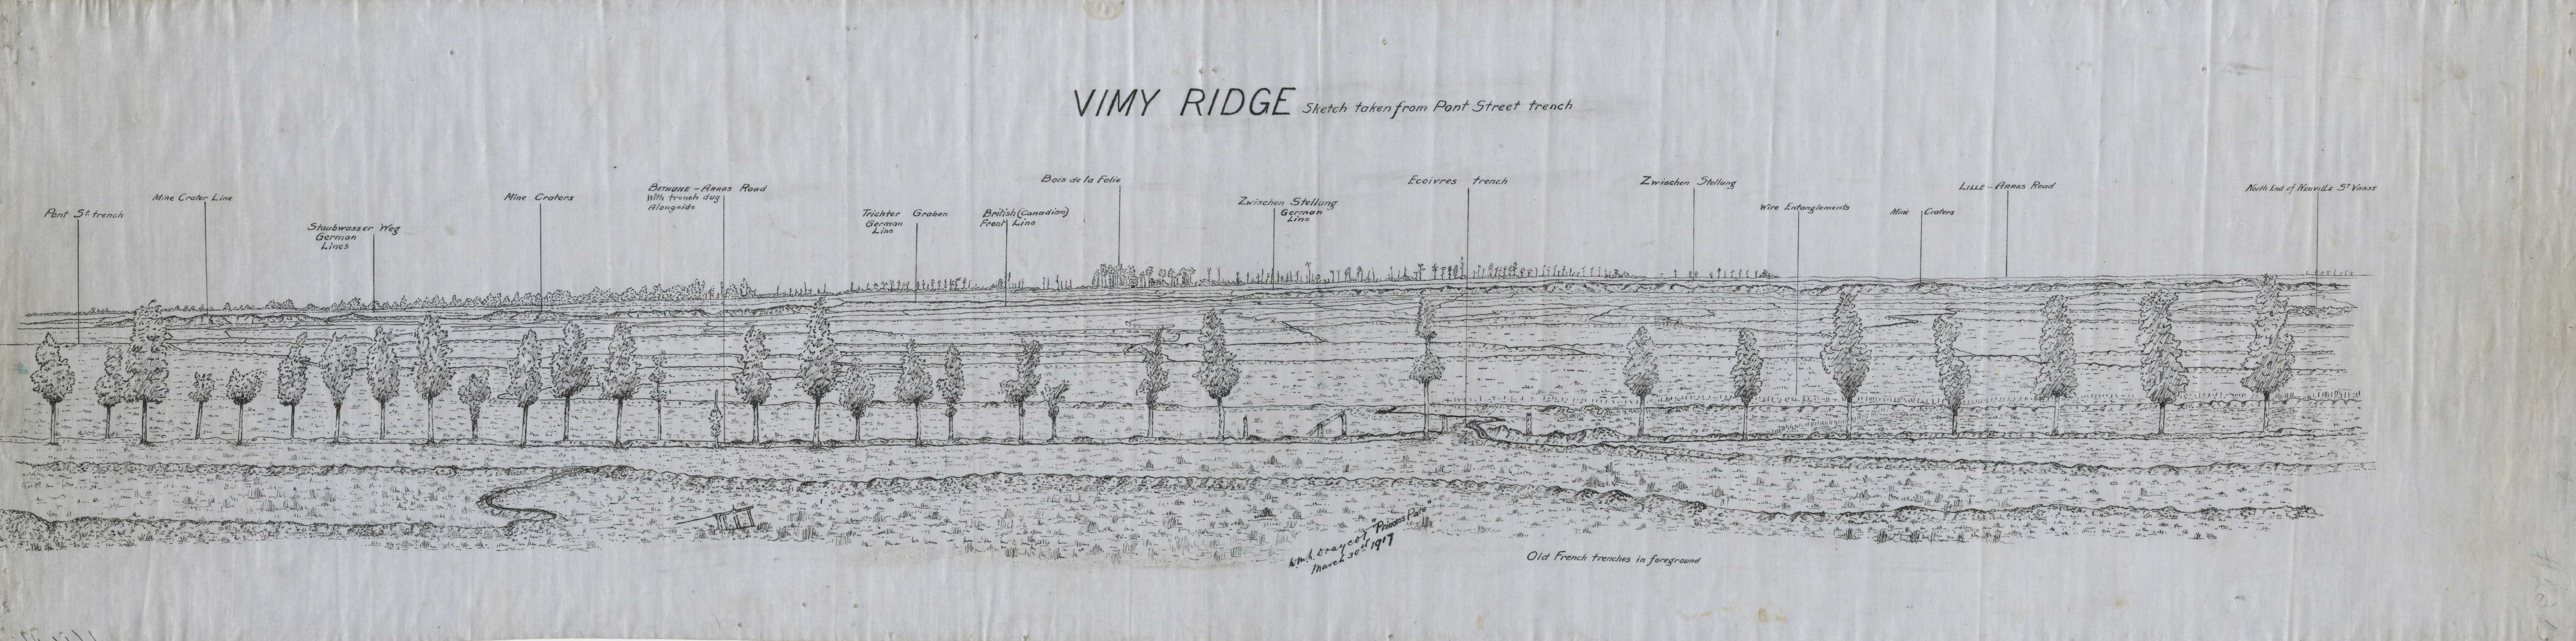 A long, panorama-style sketch of Vimy Ridge. Key features are labelled, trench lines, trees, and variations in elevation are visible. Distance is hard to determine.